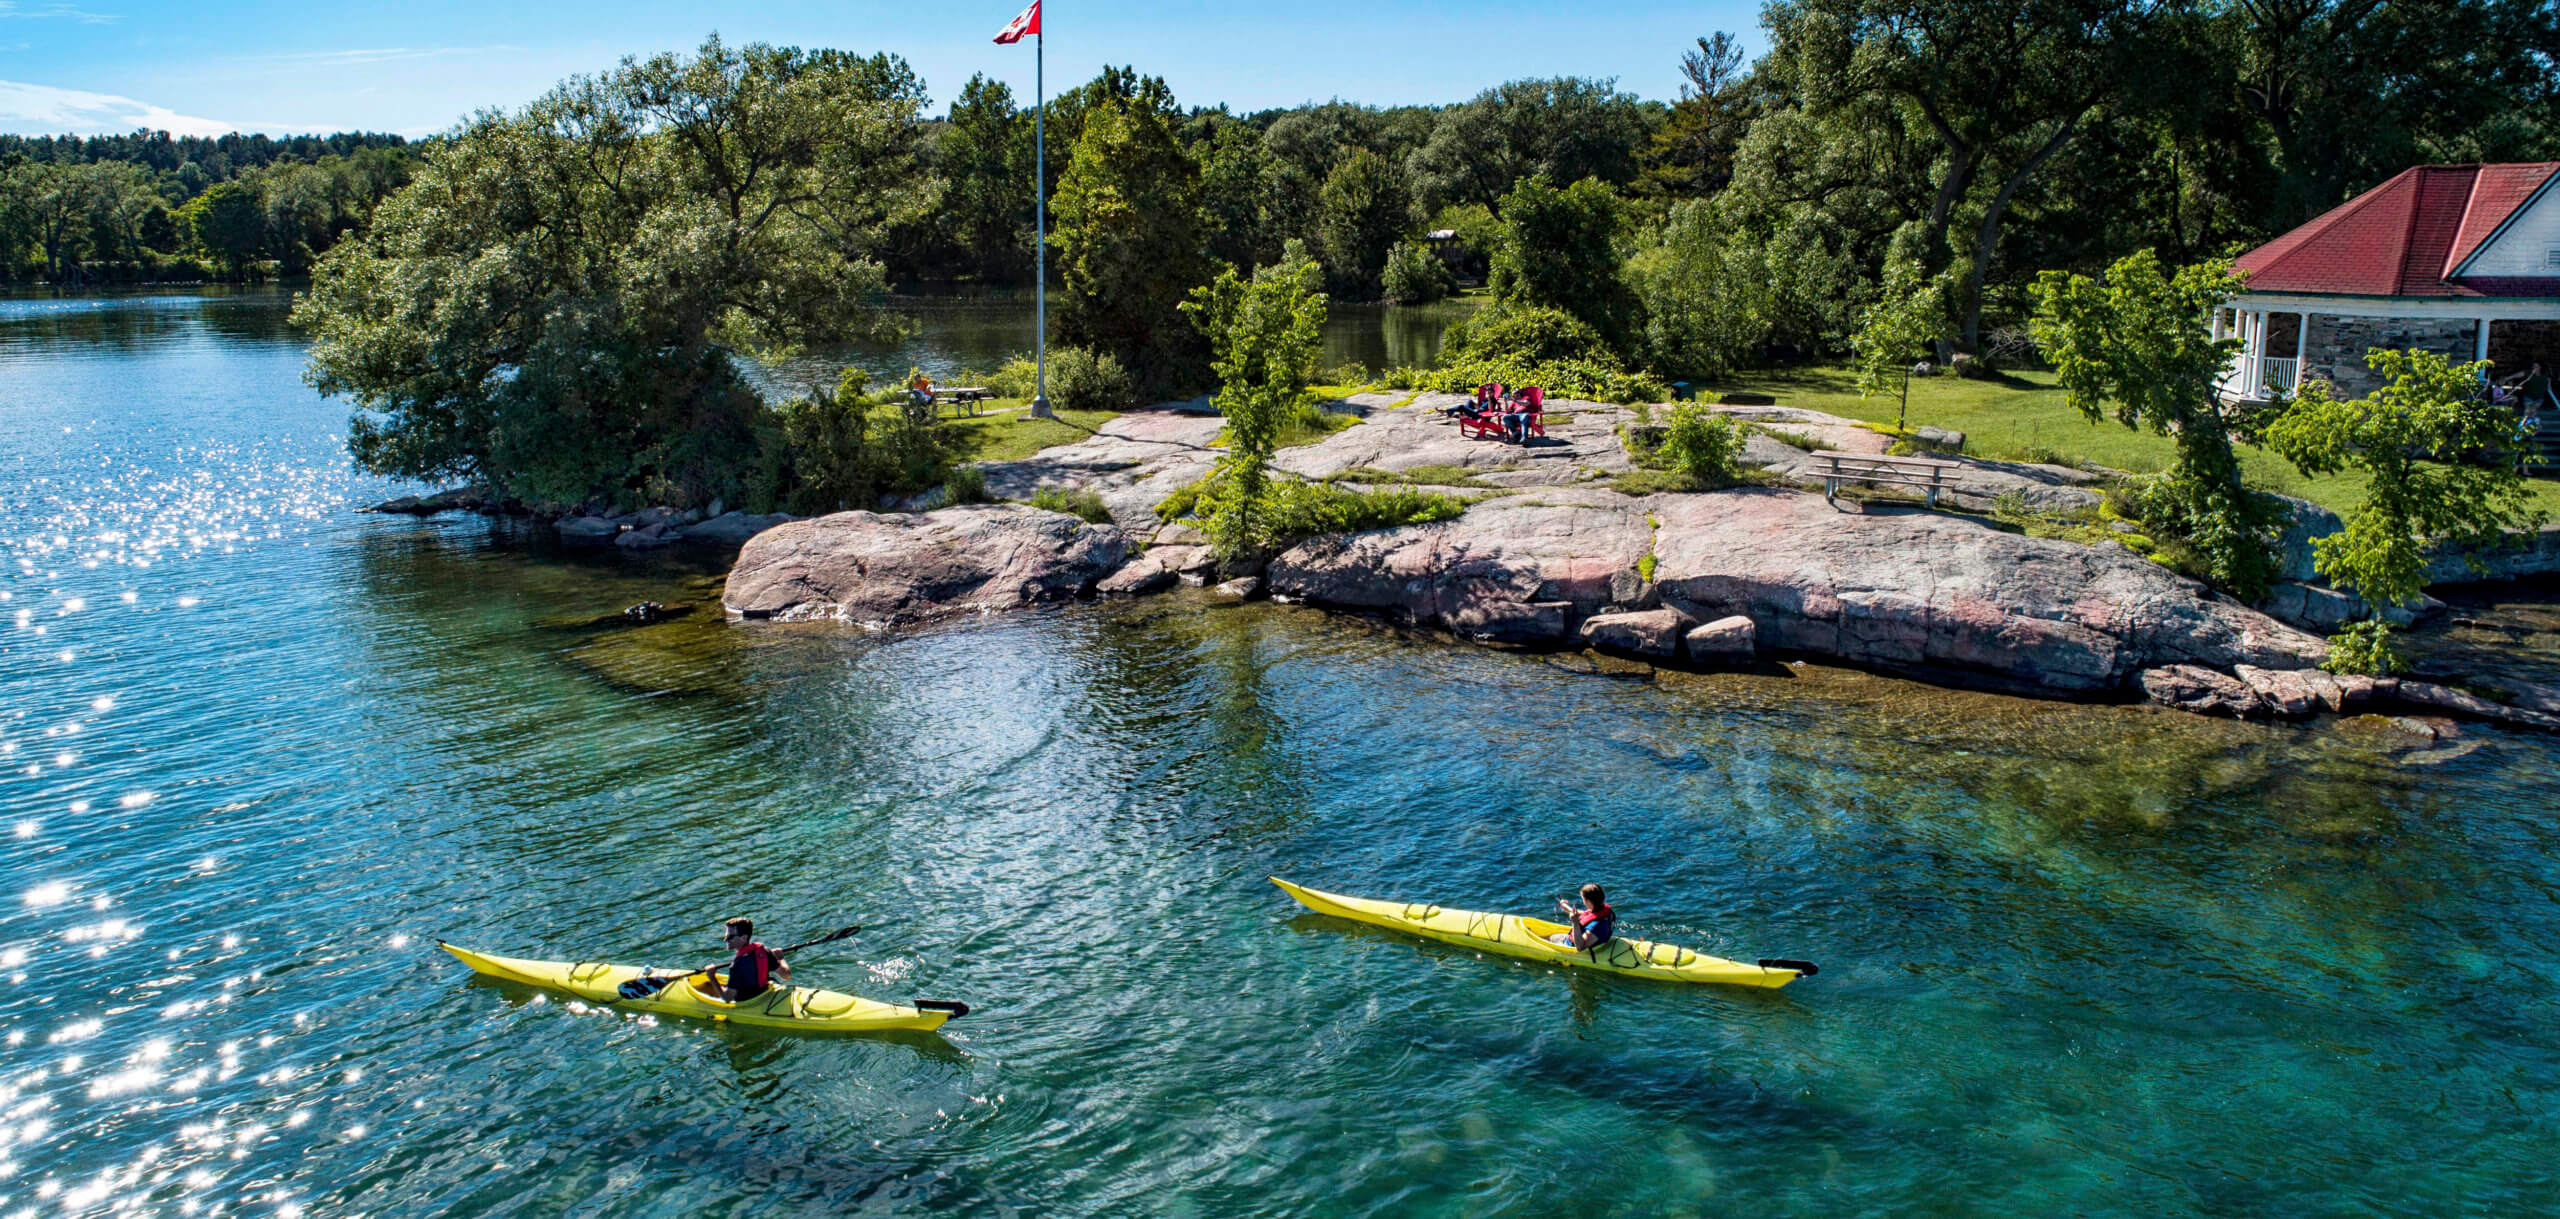 6 Ways To Experience Ontario’s Thousand Islands In 2023